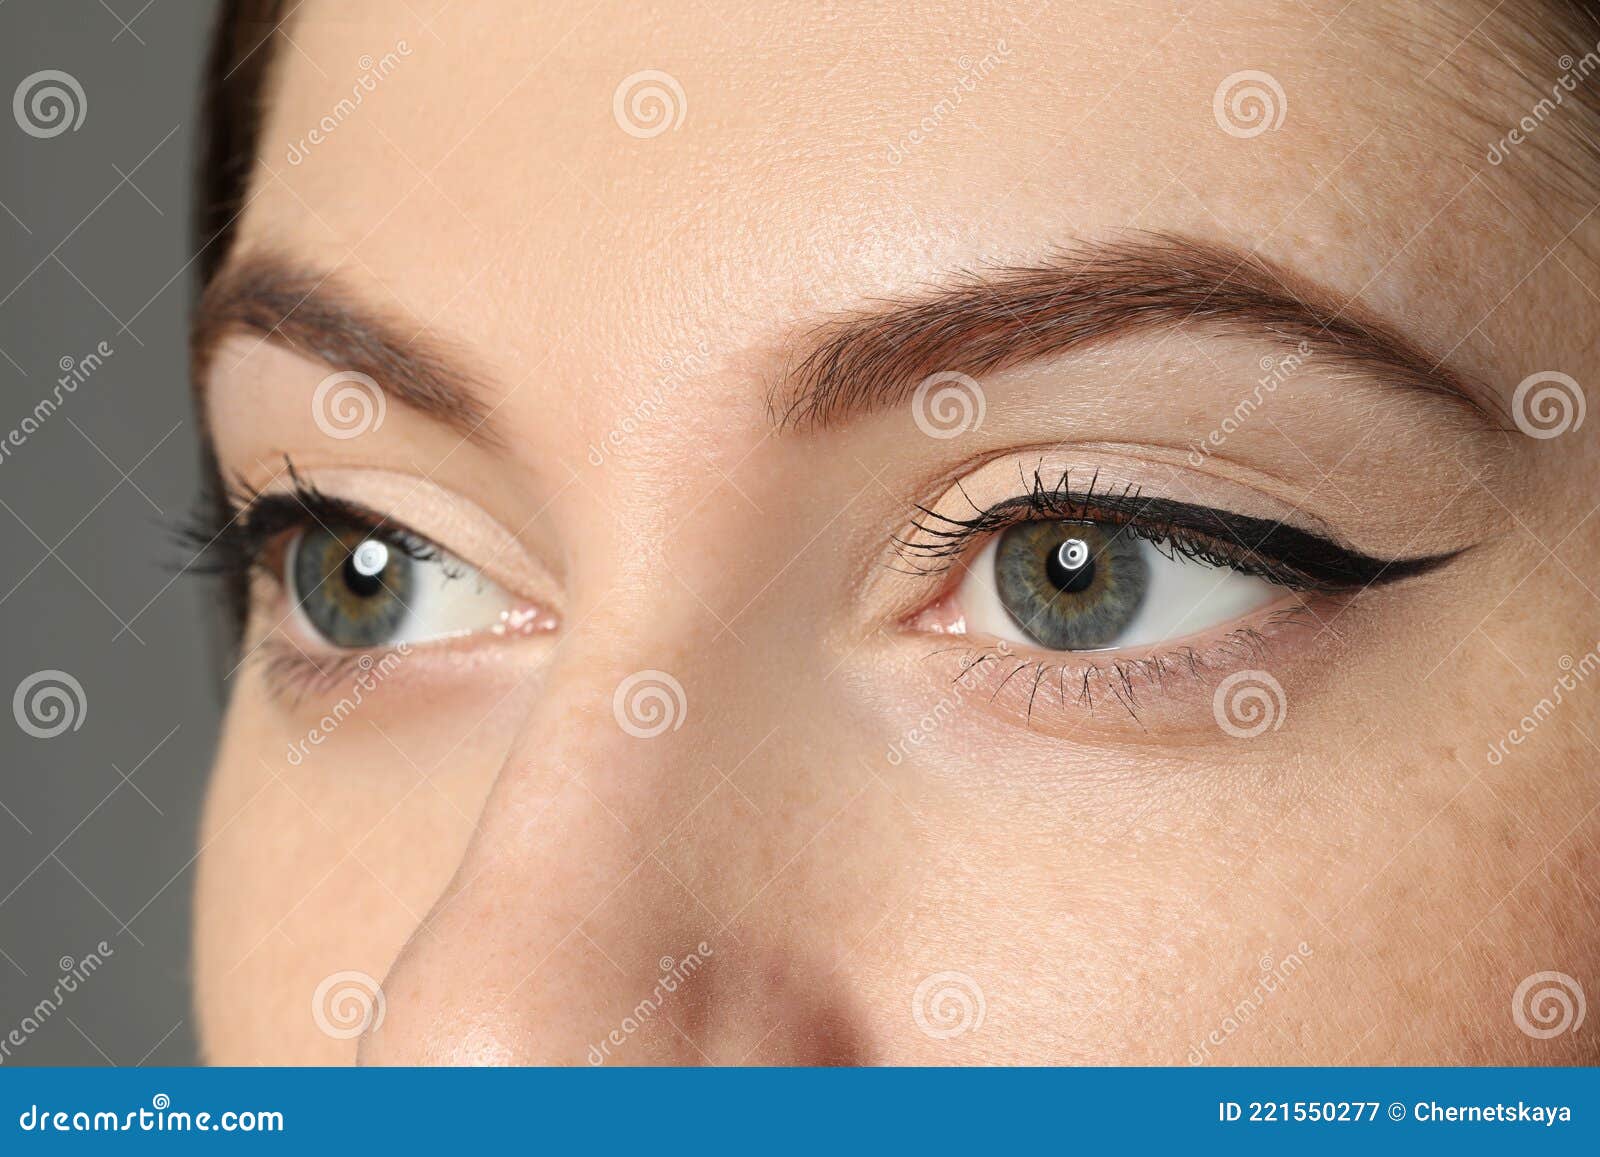 young woman with eyebrows on grey background, closeup